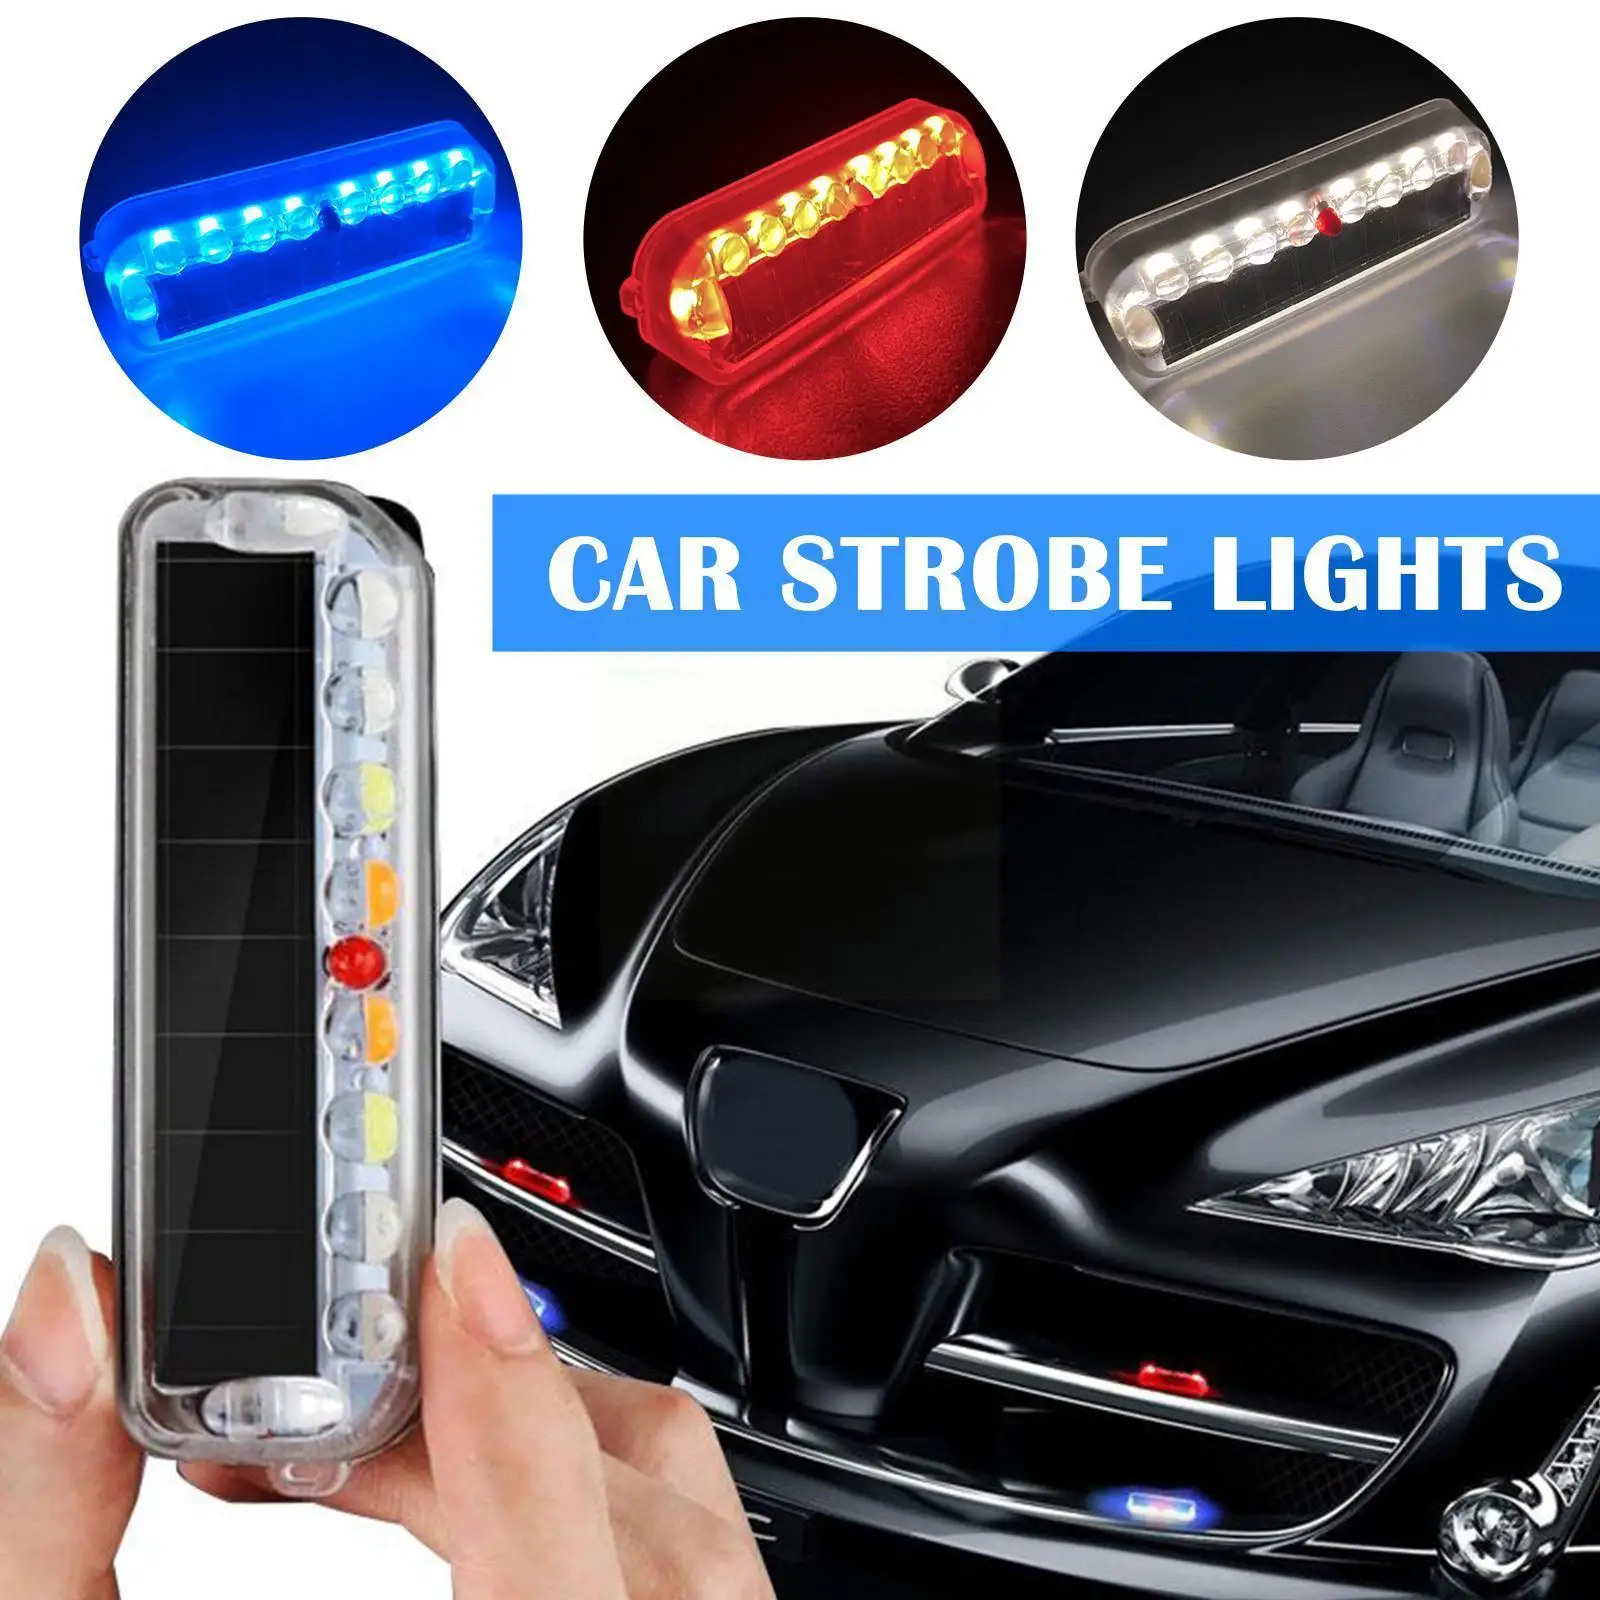 

10 LED Solar Car Strobe Lights Fake Alarm Warning Security Double-sided Flashing Tape Lamp Self-adhesive With Anti-Theft M5A0